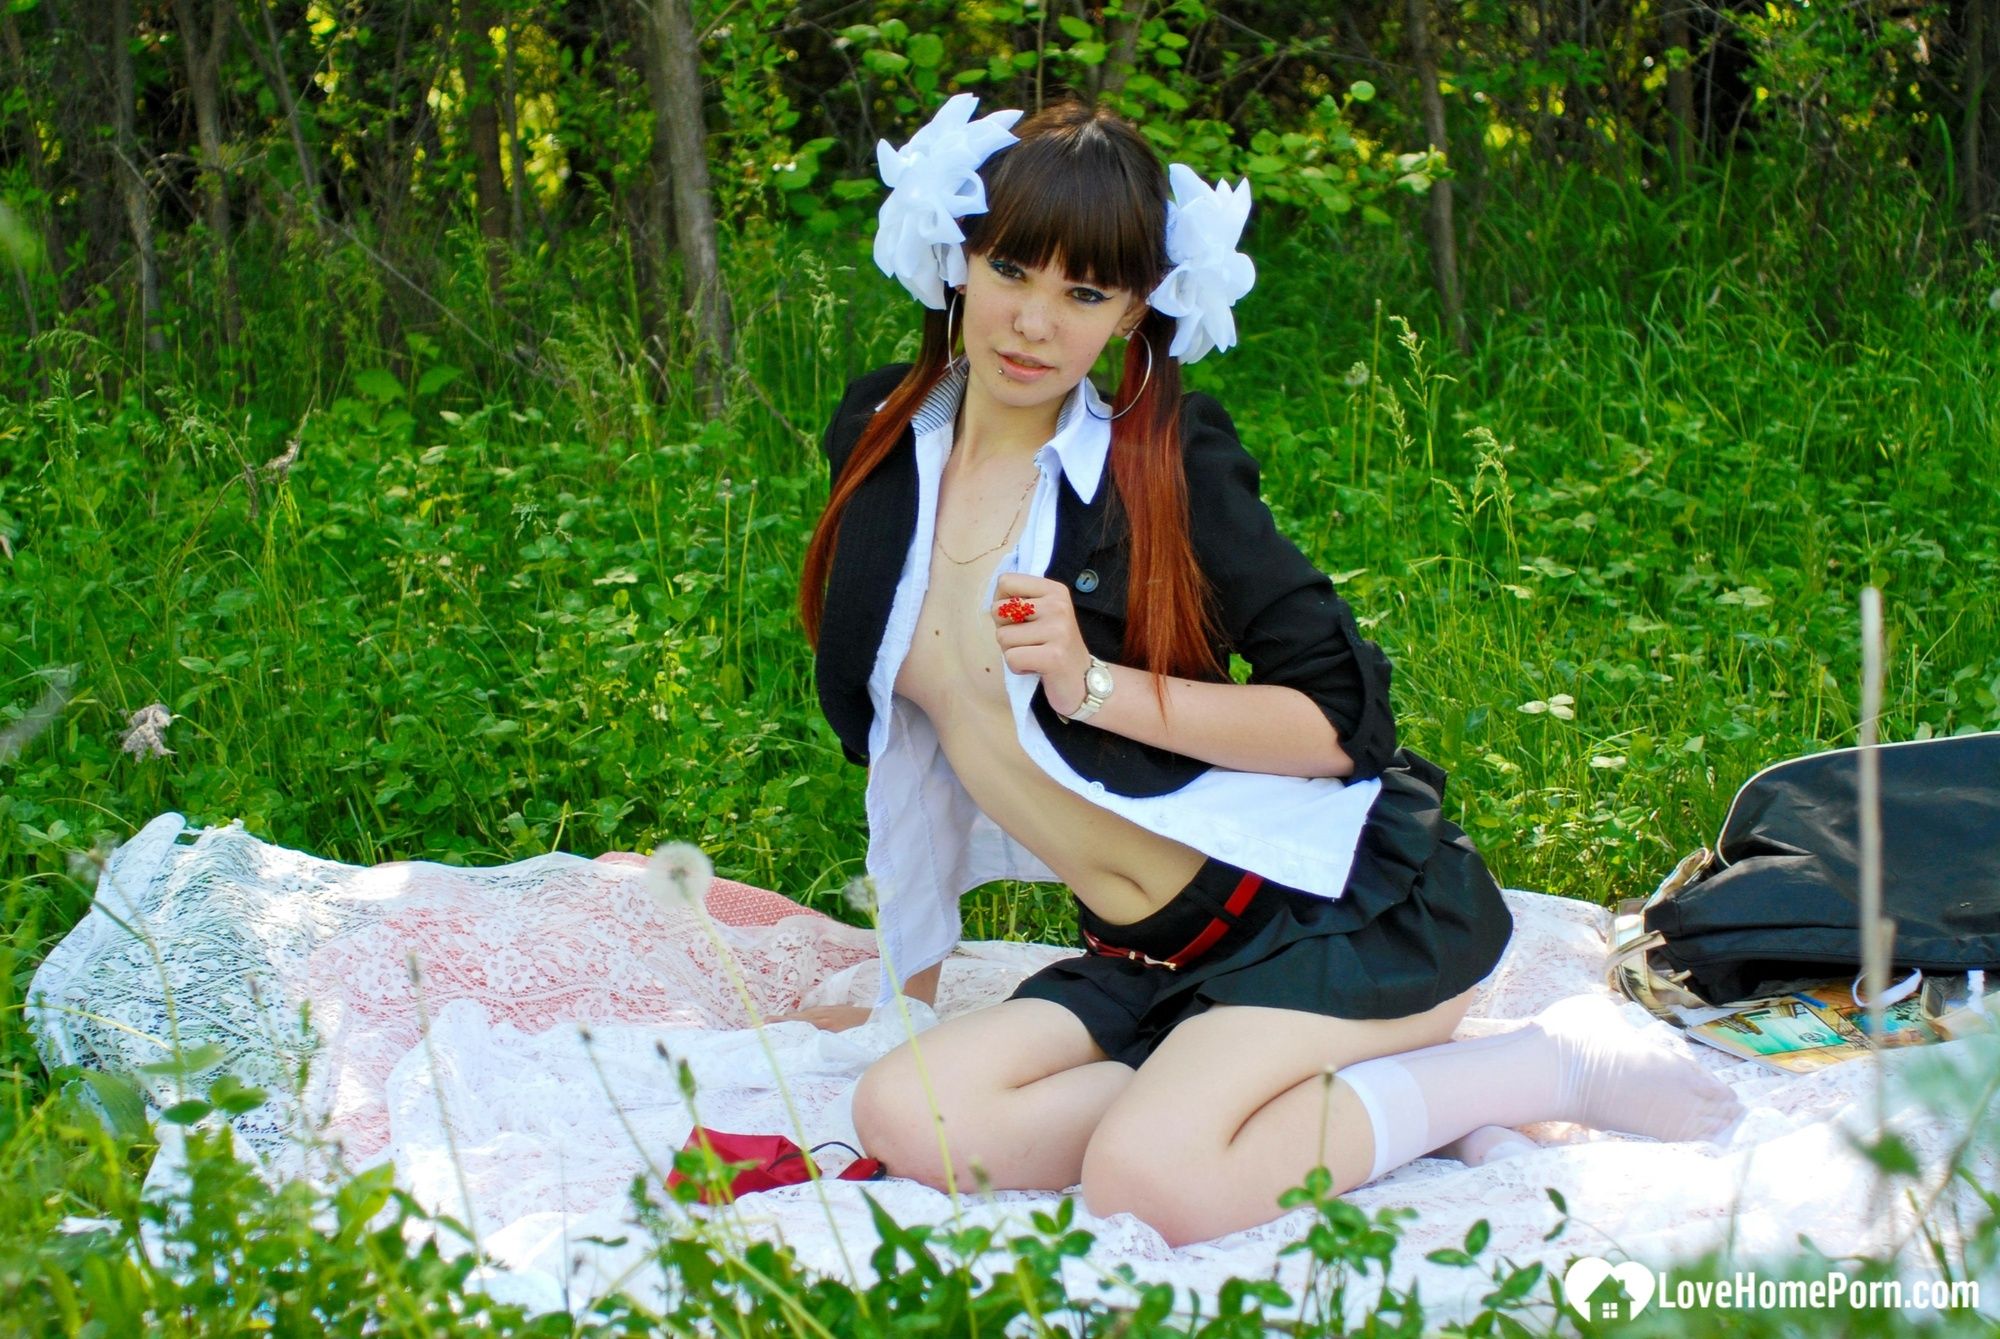 Schoolgirl turns a picnic into a teasing session #9